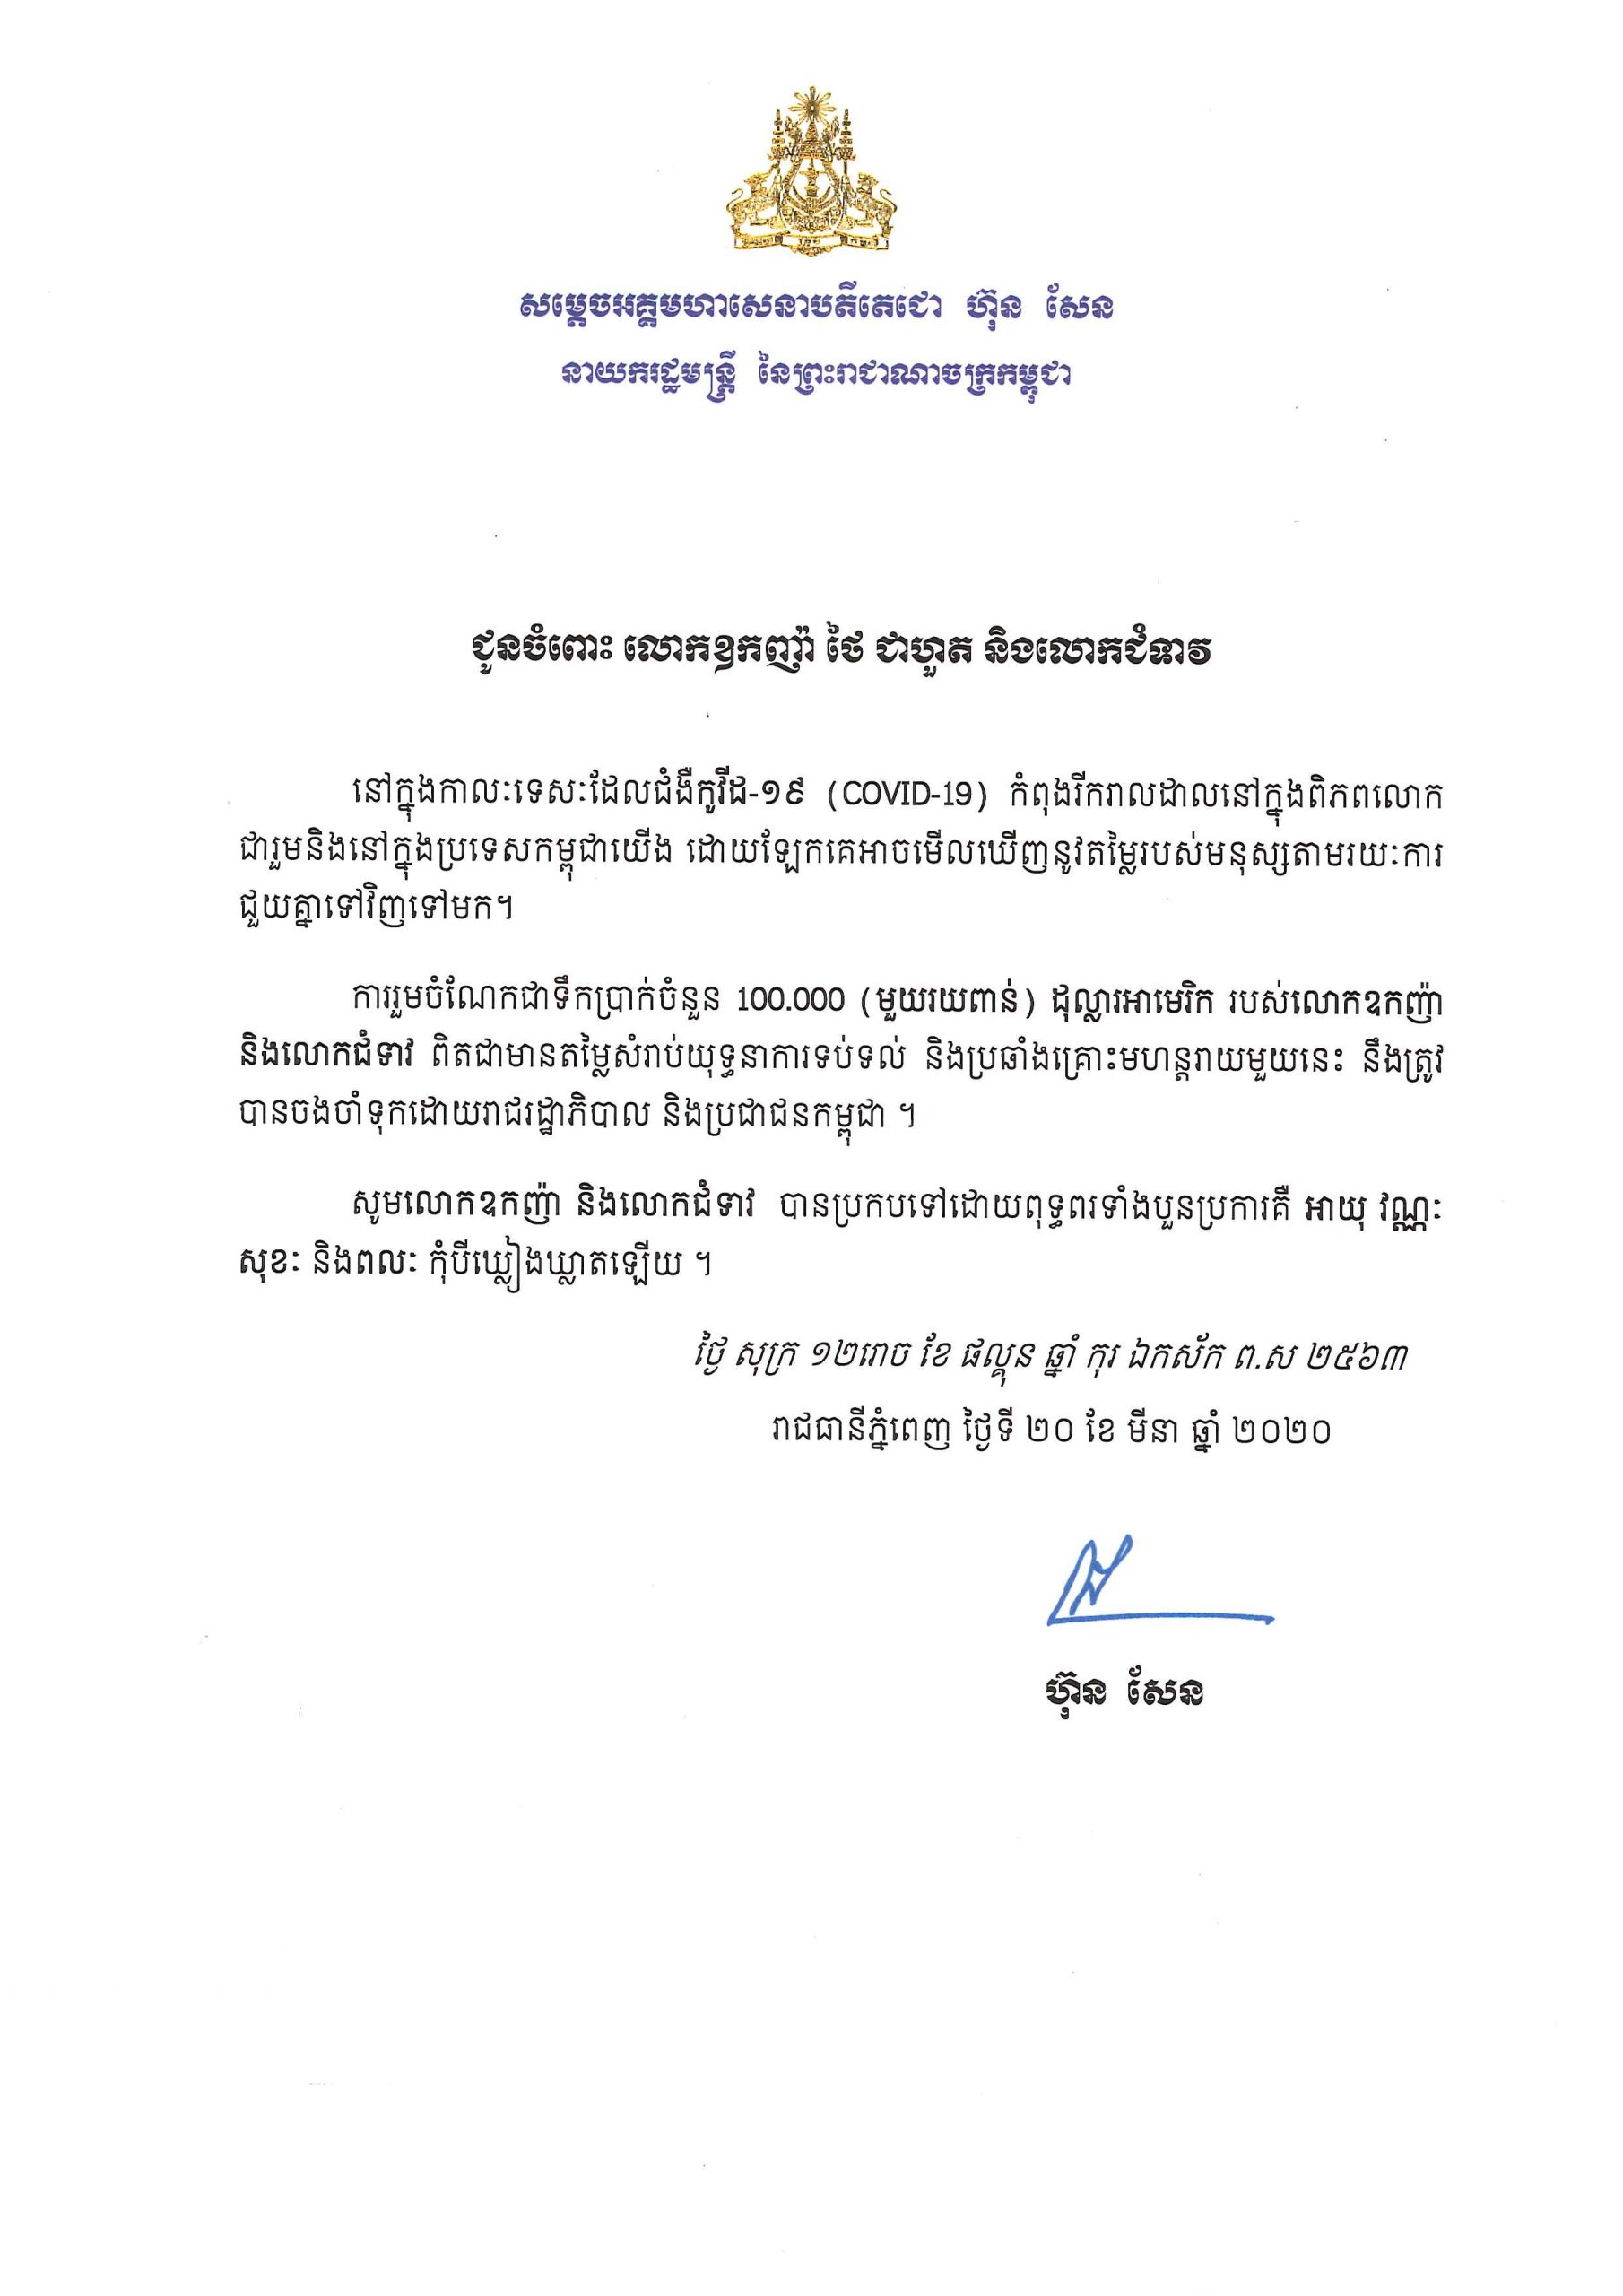 Certificate of Appreciation from Royal Government of Cambodia for the purchase of Covid-19 vaccine for US $ 100,000